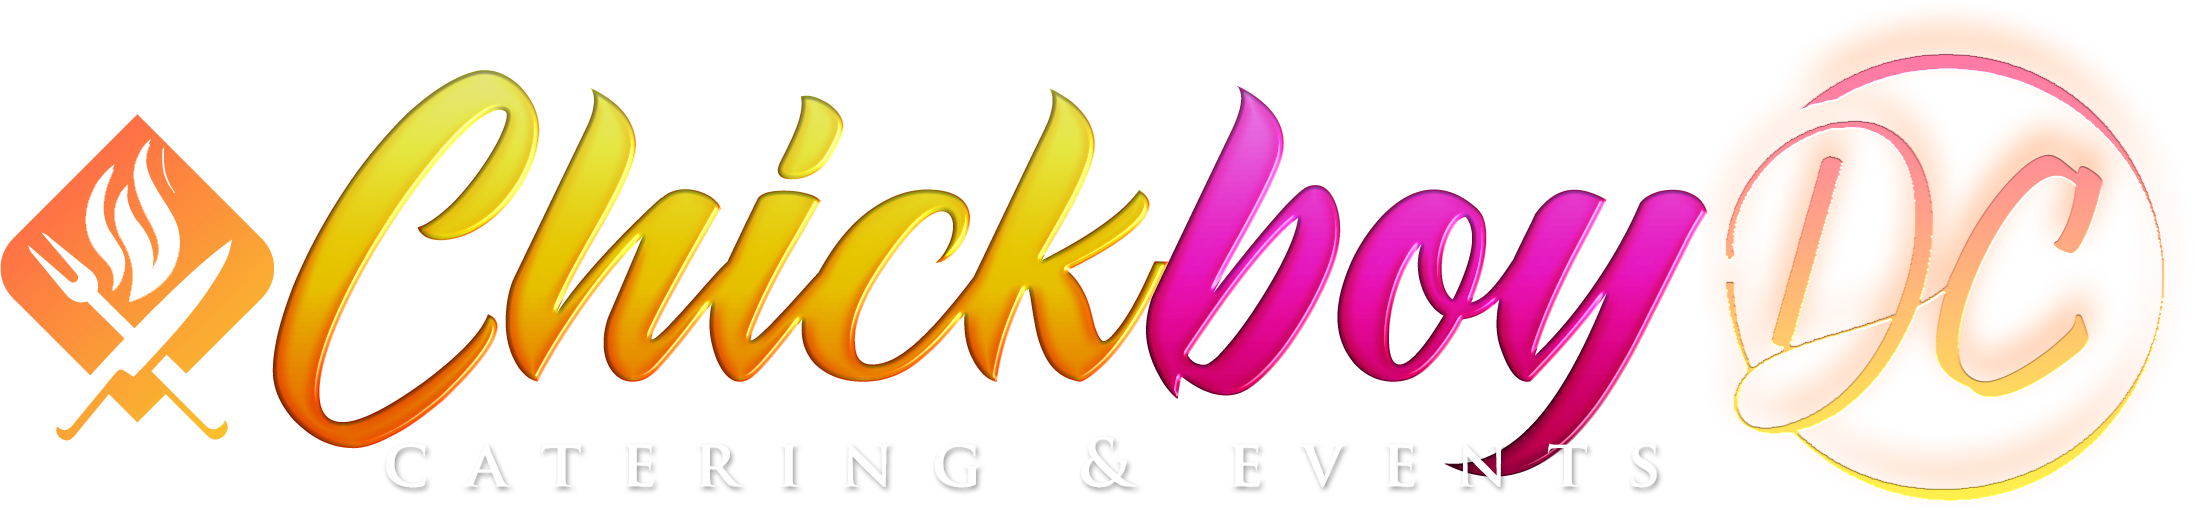 Chickboy DC Catering & Events